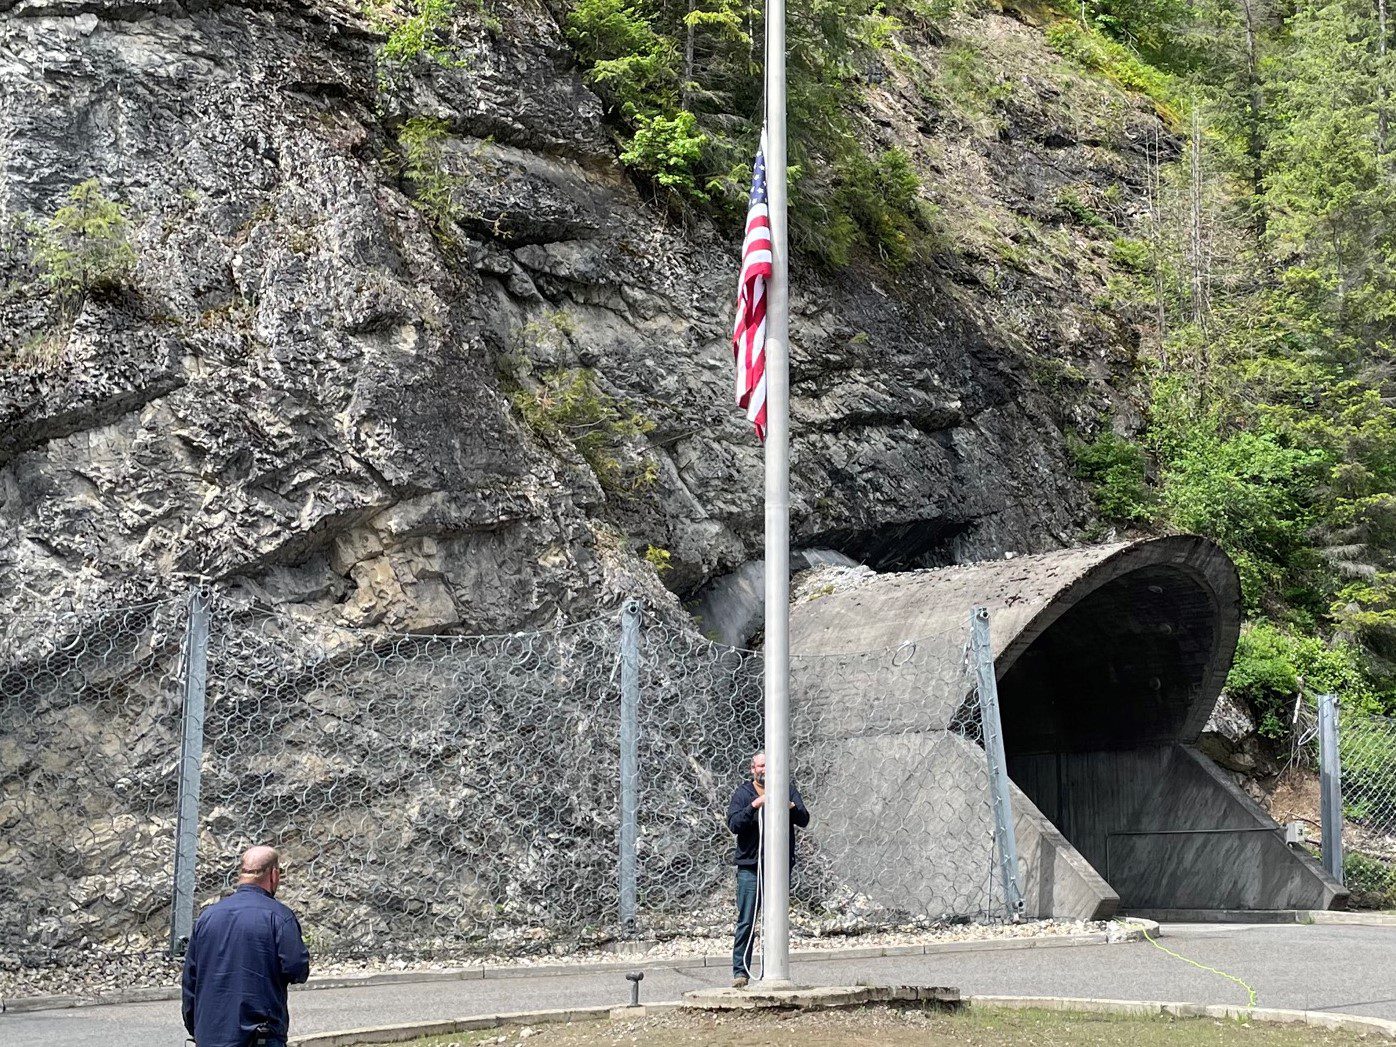 Seattle City Light workers at Boundary Hydroelectric Project salute the American flag, lowered to half mast.